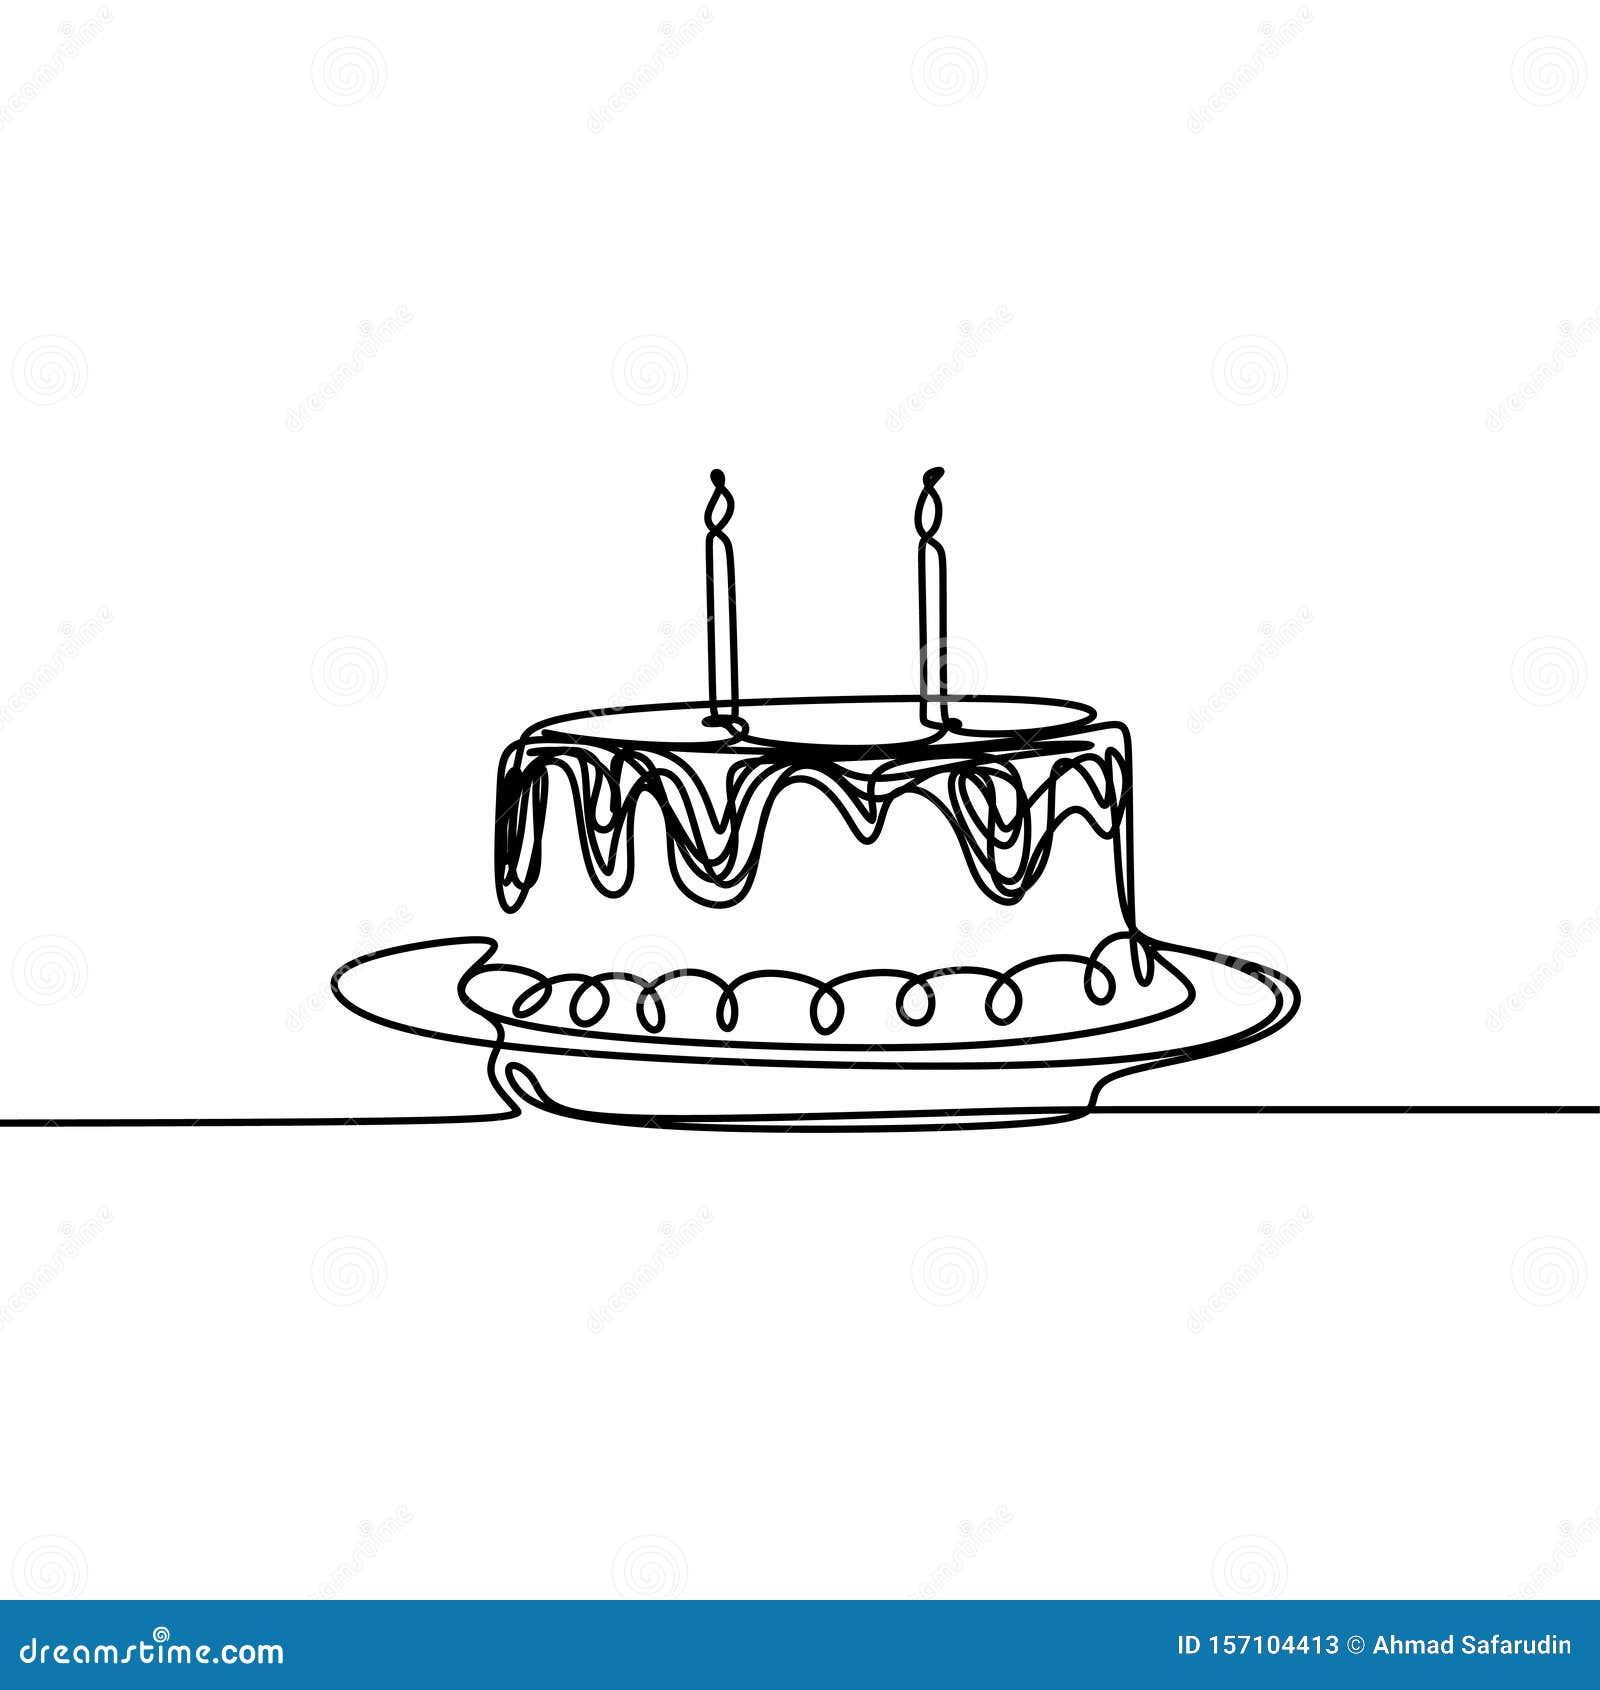 File:Draw this birthday cake.svg - Wikimedia Commons